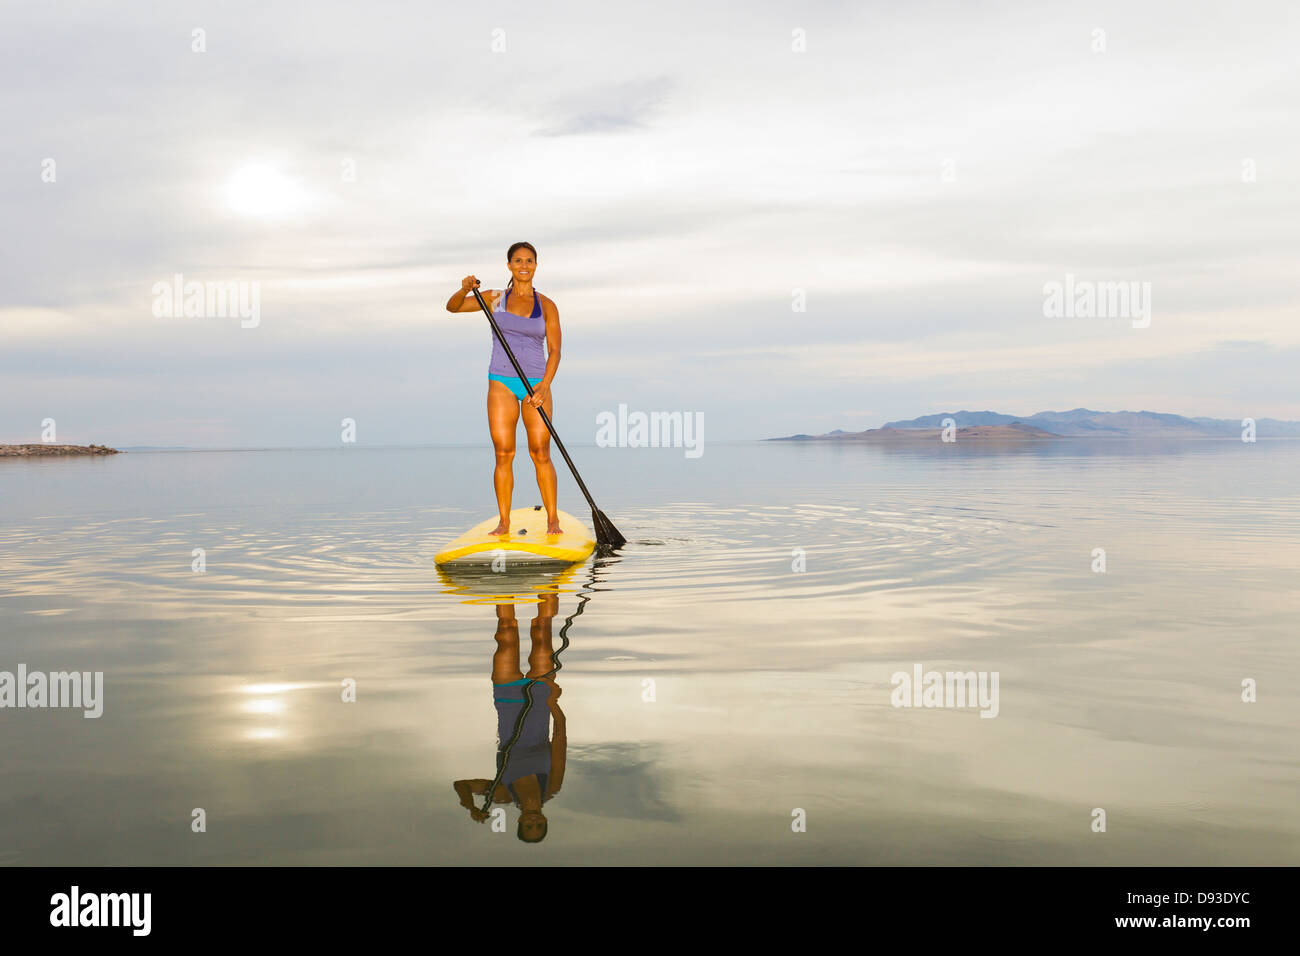 Filipino woman riding paddle board Banque D'Images